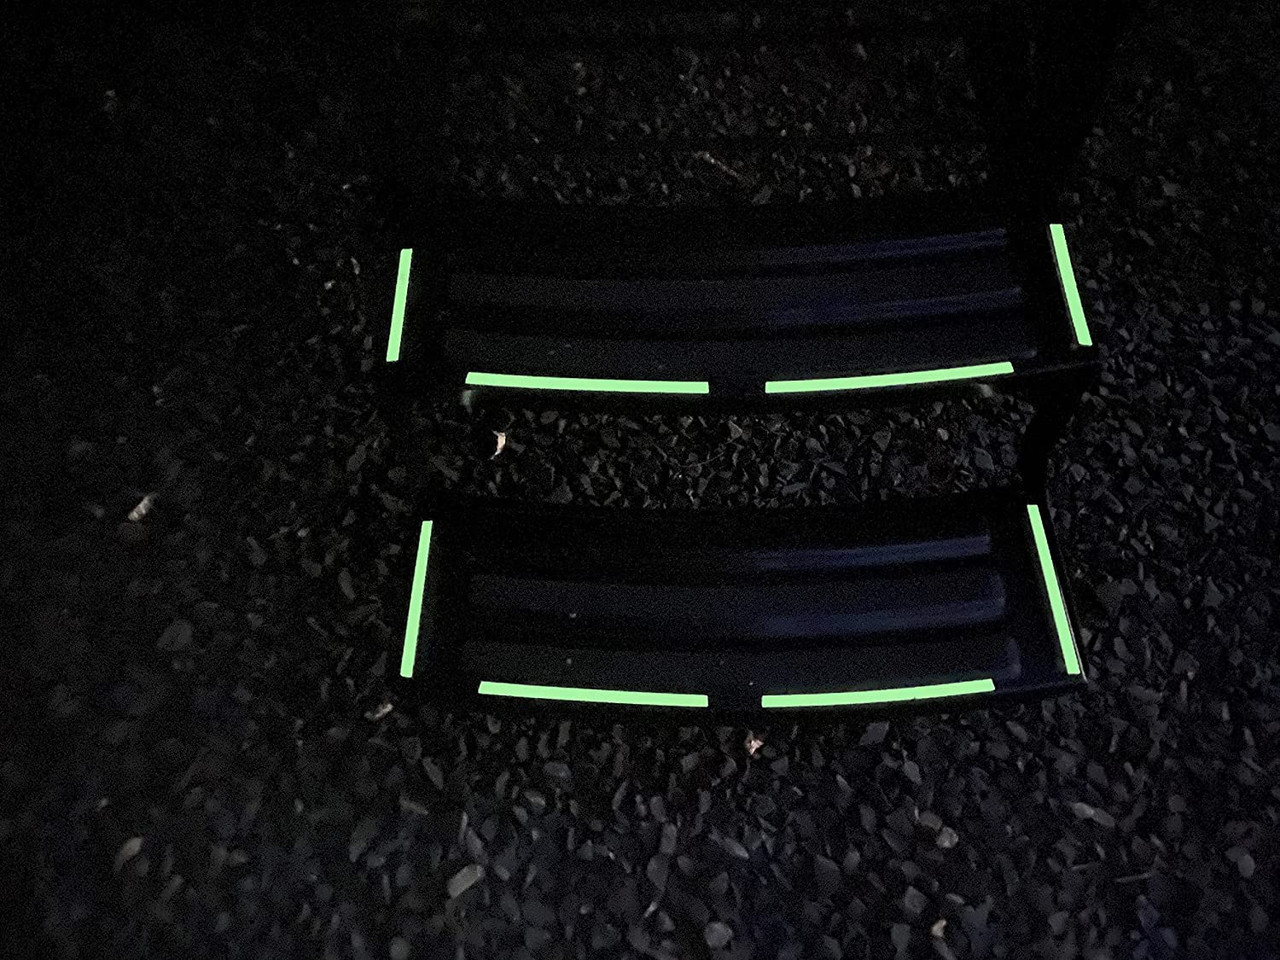 close-up of ifloortape Glow in The Dark Vinyl Decal Sticker Kit. Being demonstrated at night on trailer stairs.